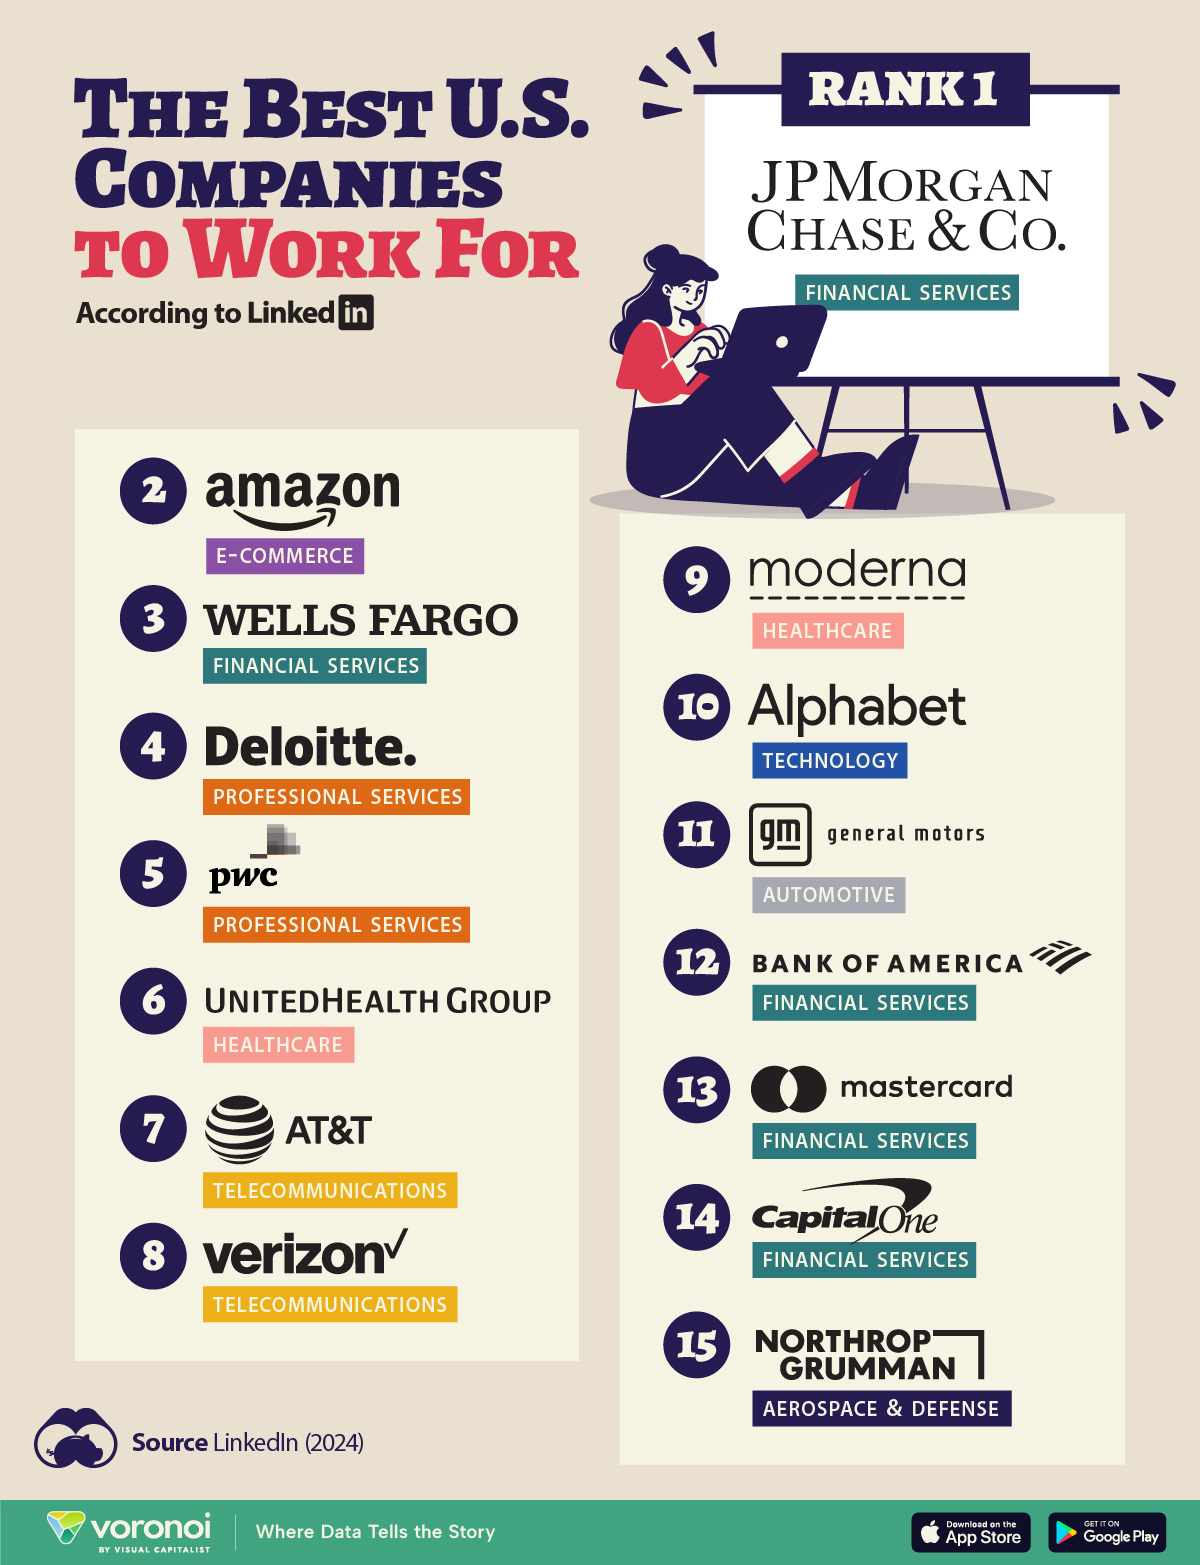 List of the 15 best U.S. companies to work for in 2024, according to LinkedIn data.